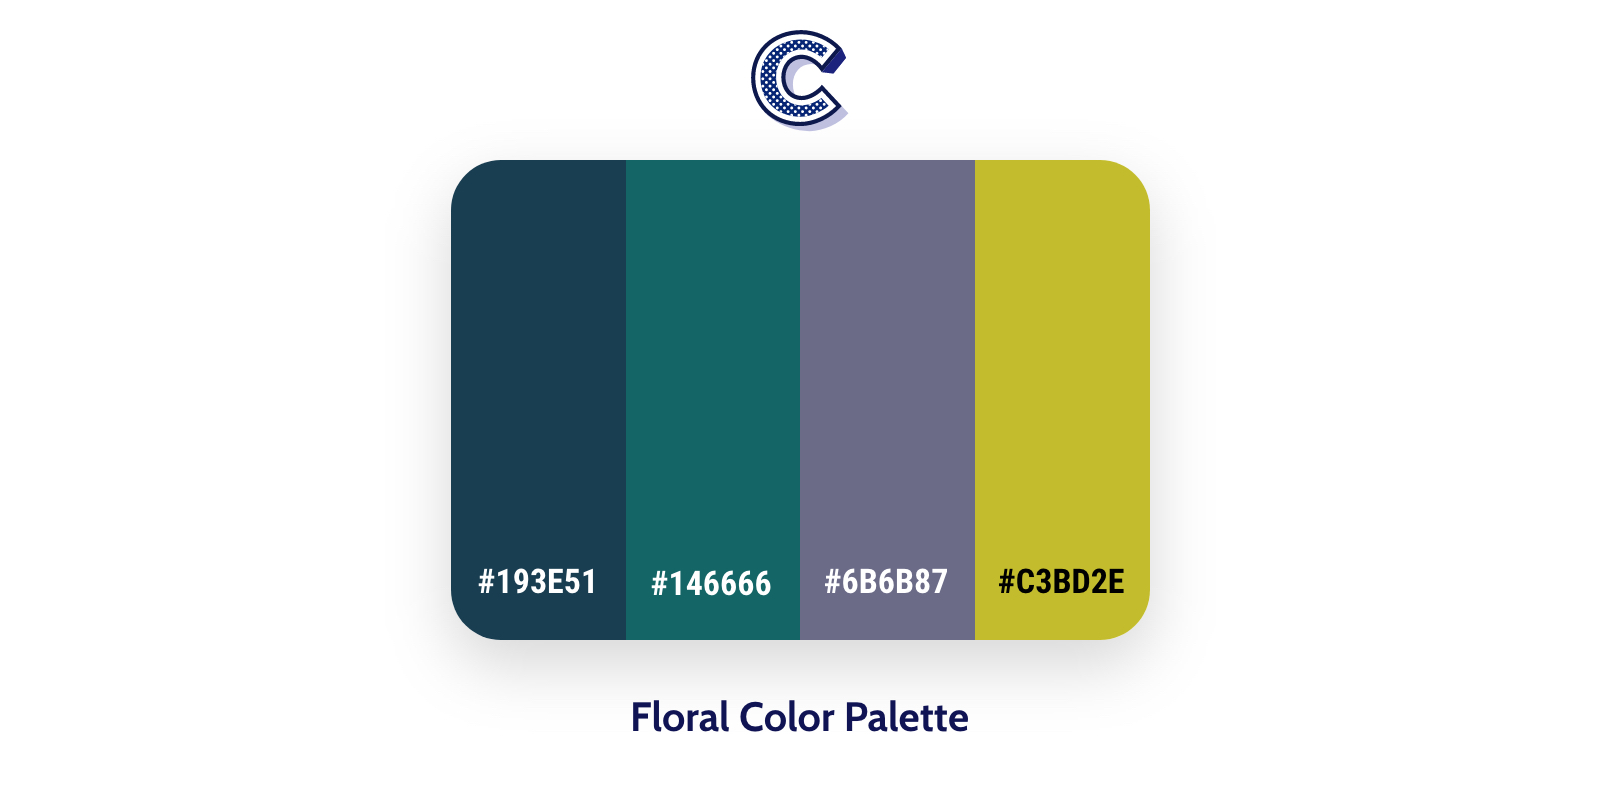 the featured of floral color palette